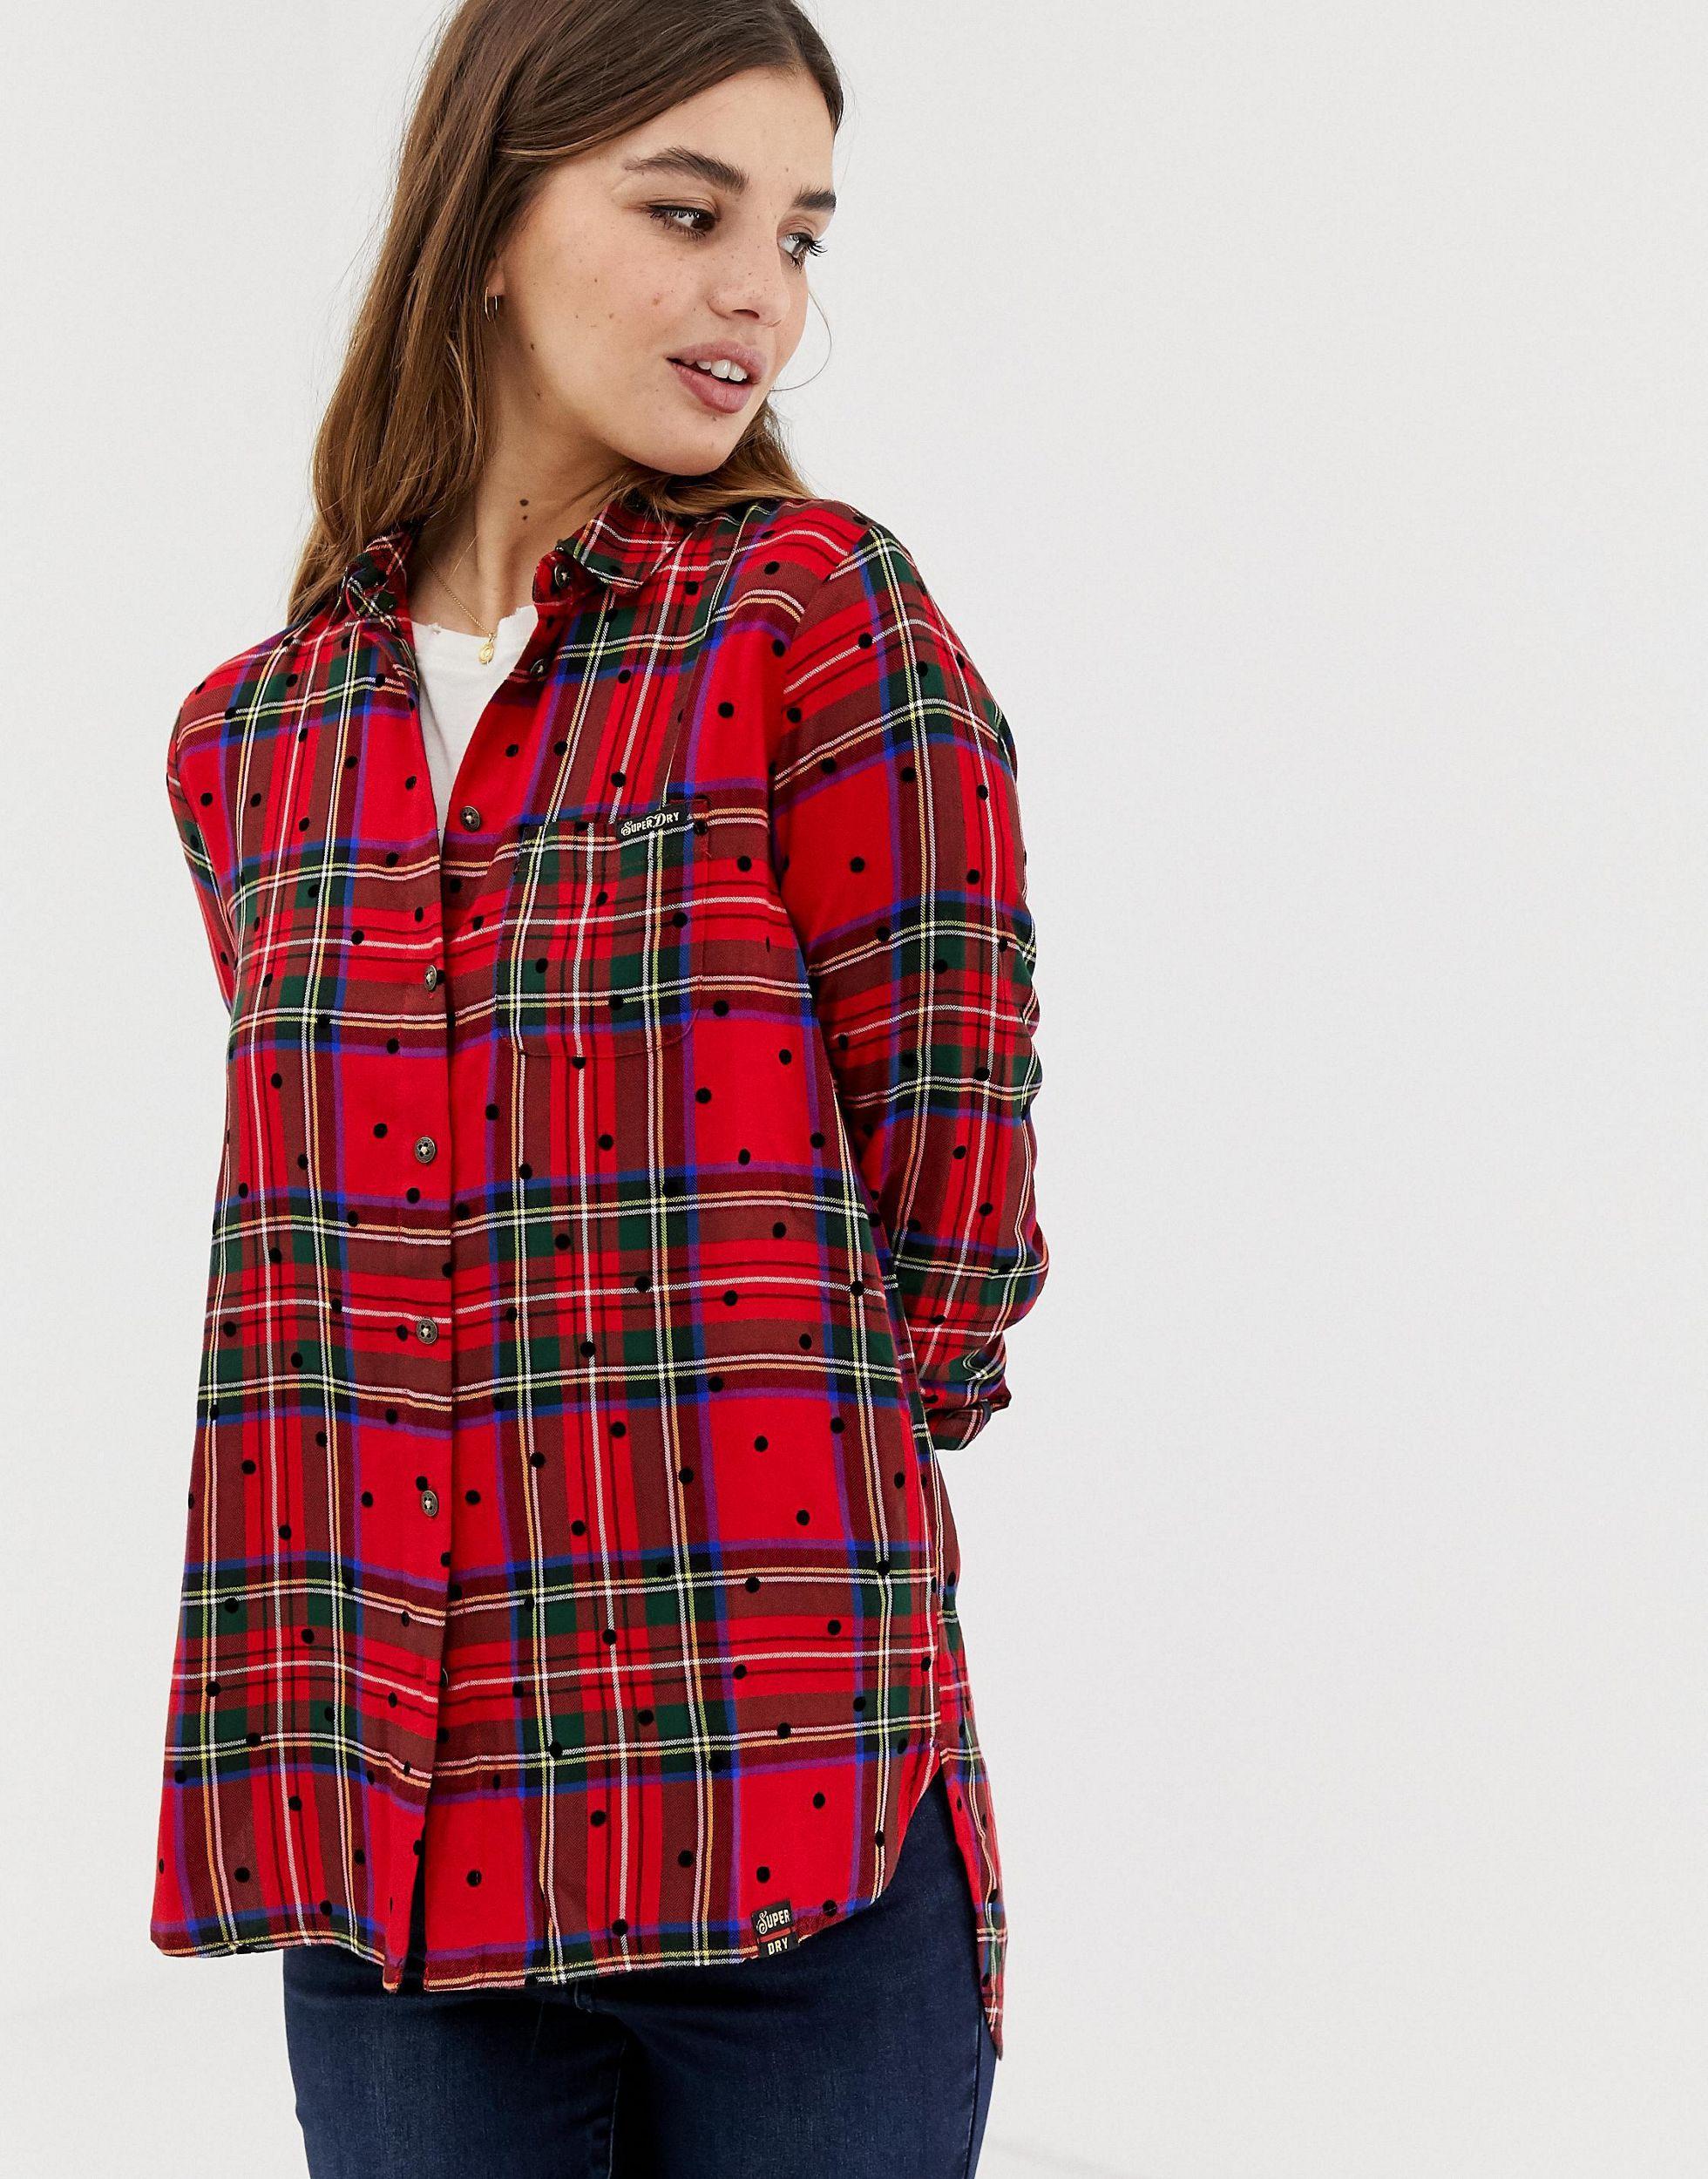 Superdry Denim Check Shirt With Polka Dots in Red - Lyst